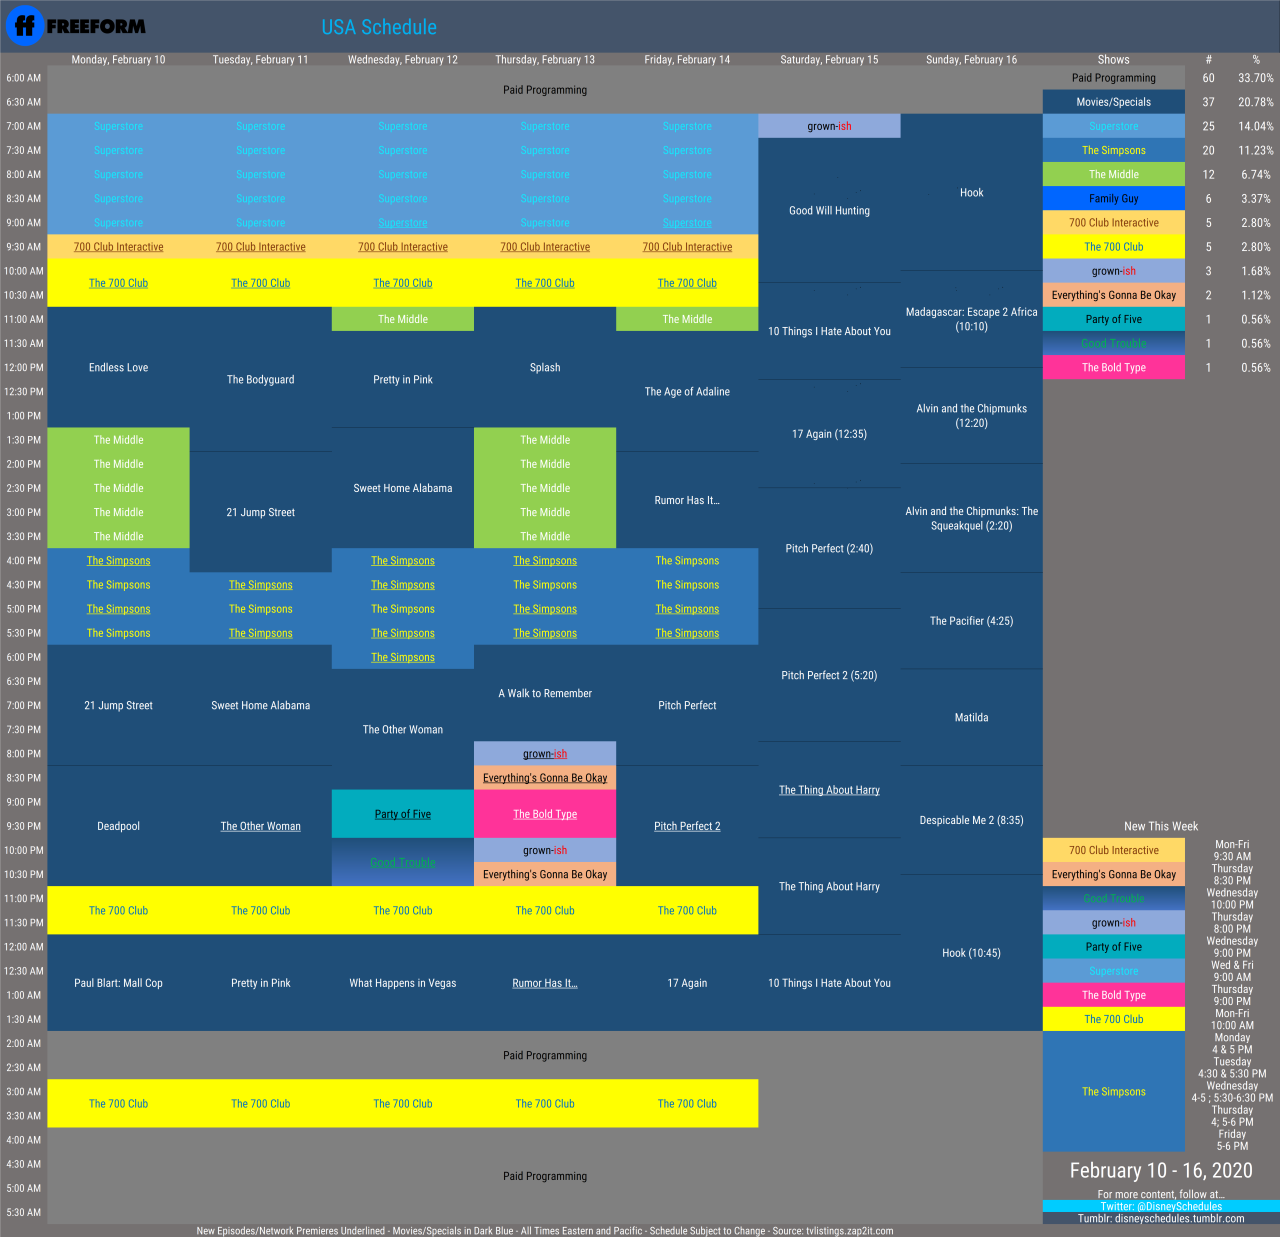 Disney Schedule Thread and Archive — Freeform’s Schedule for February 10-16. Love...